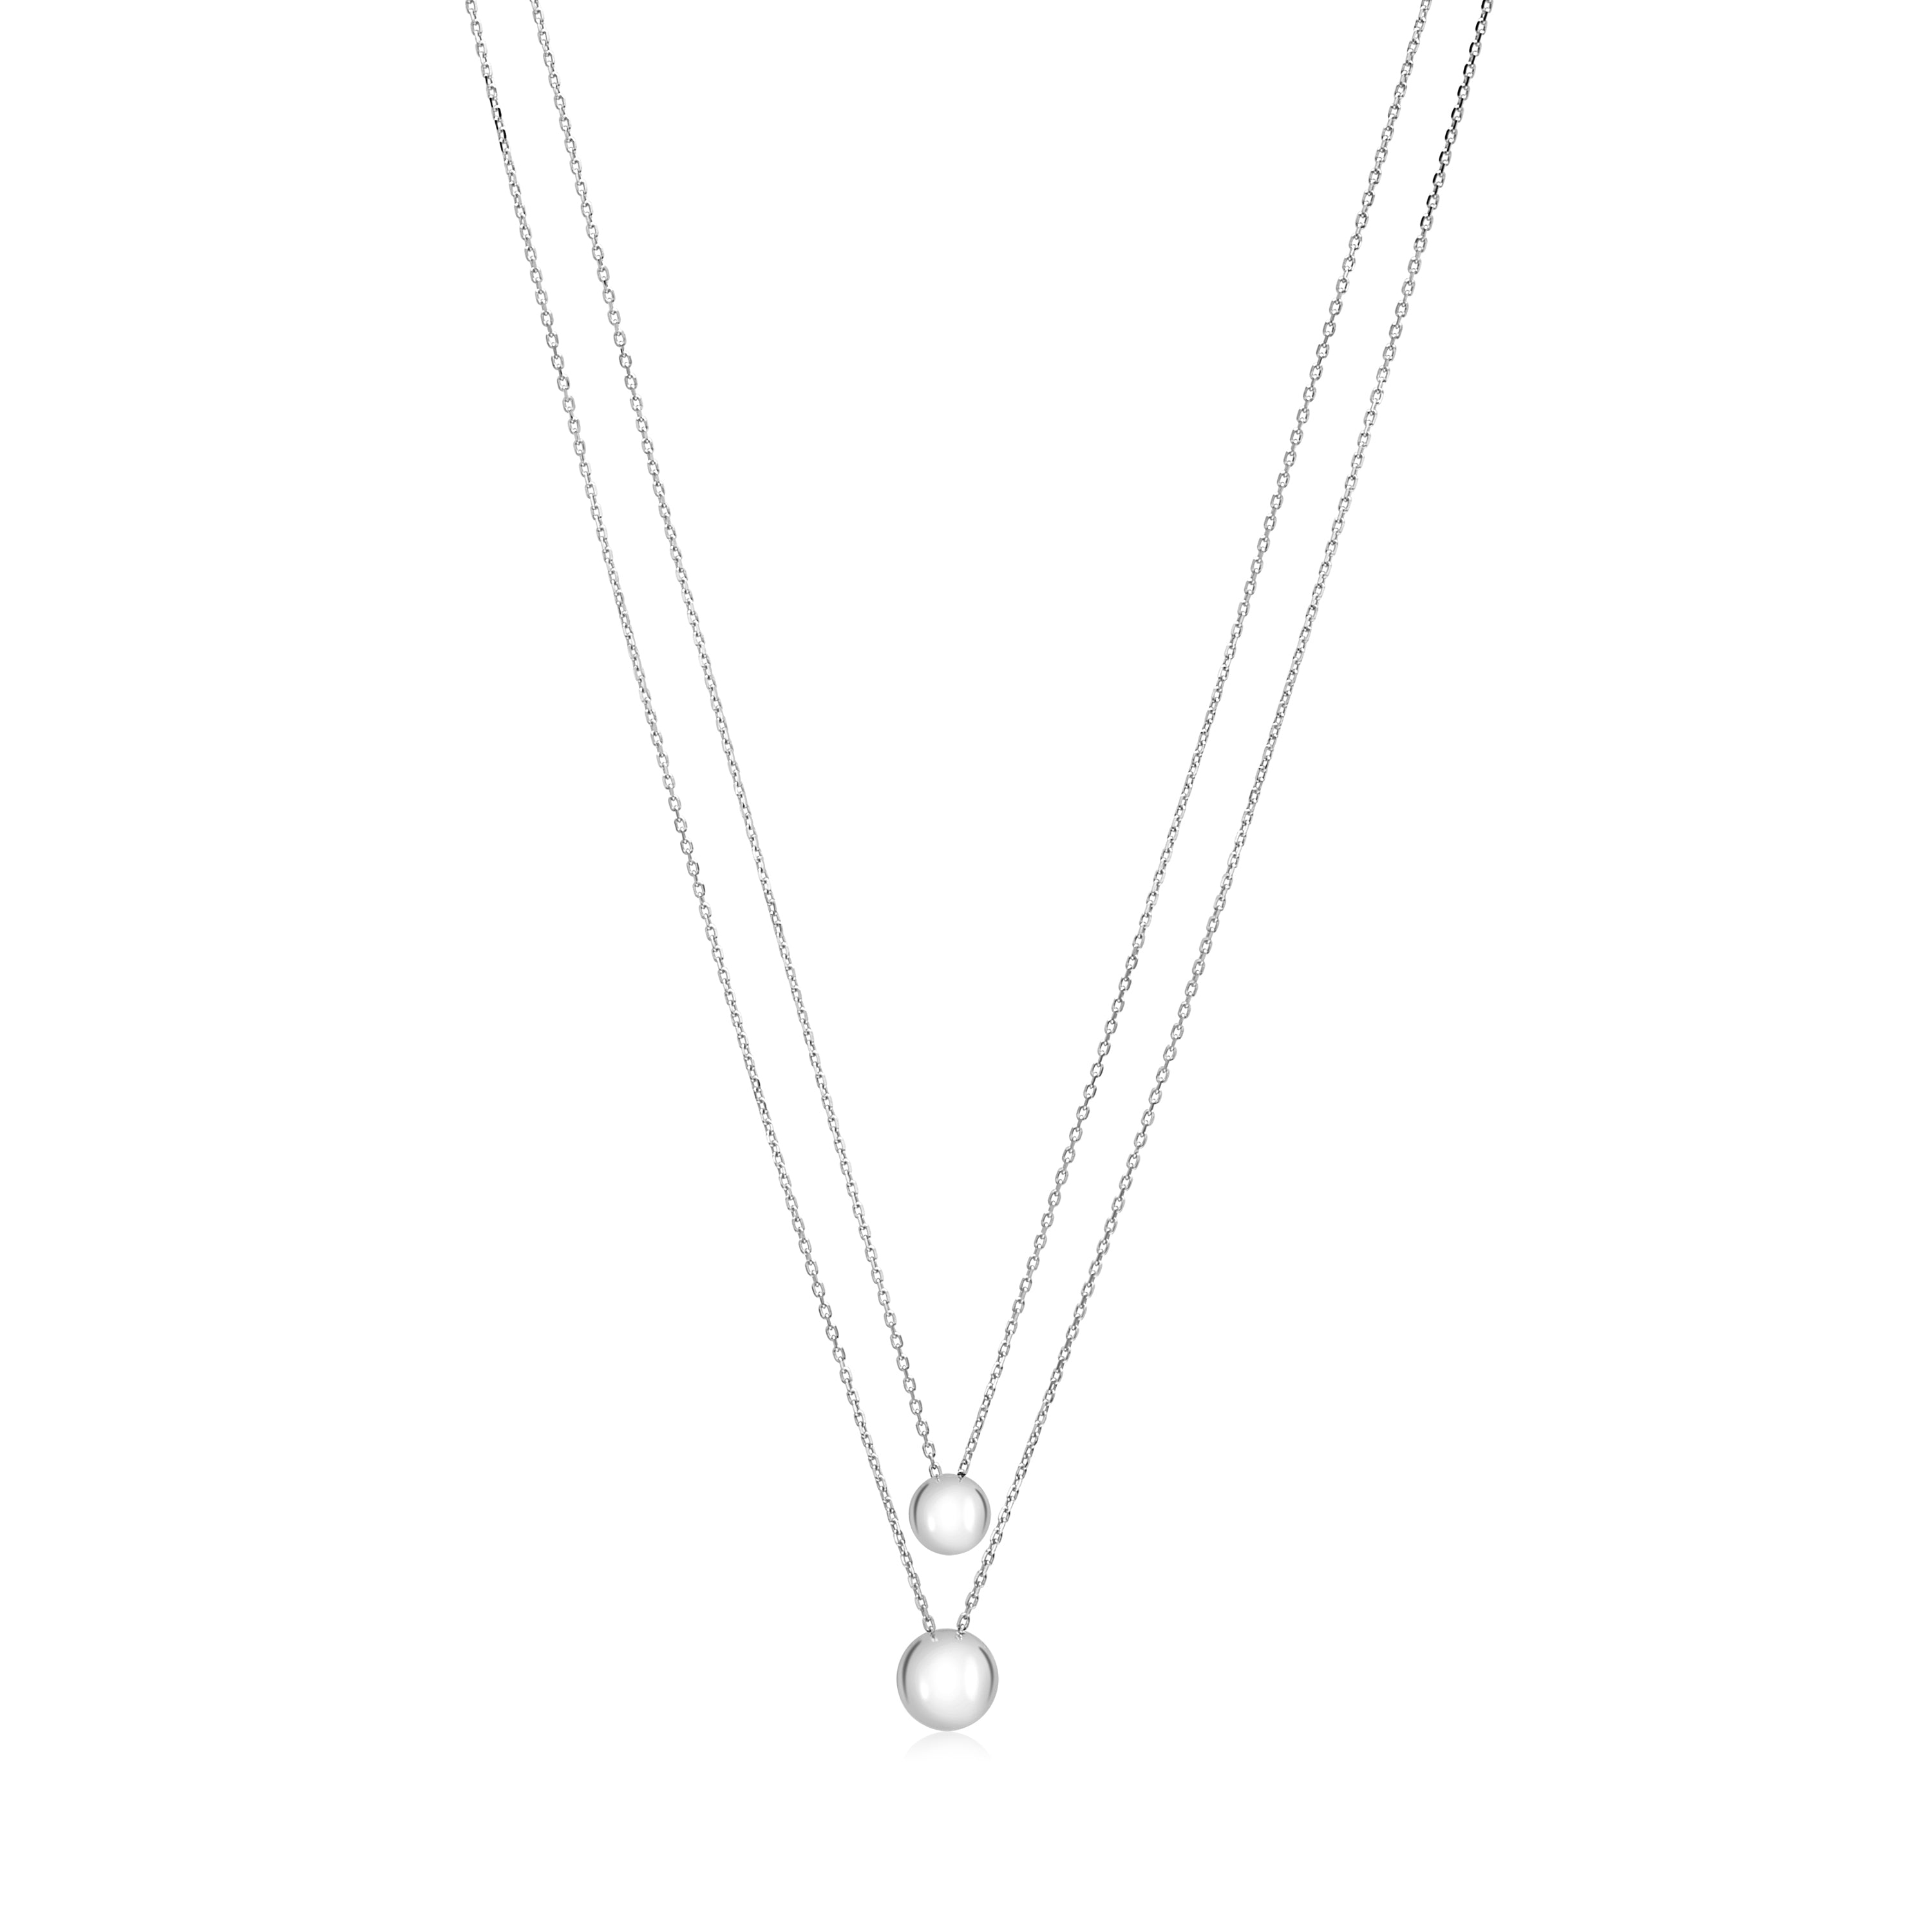 Sterling Silver High Polished Double Layer Ball Necklace Pendant on Cable Chain 19"